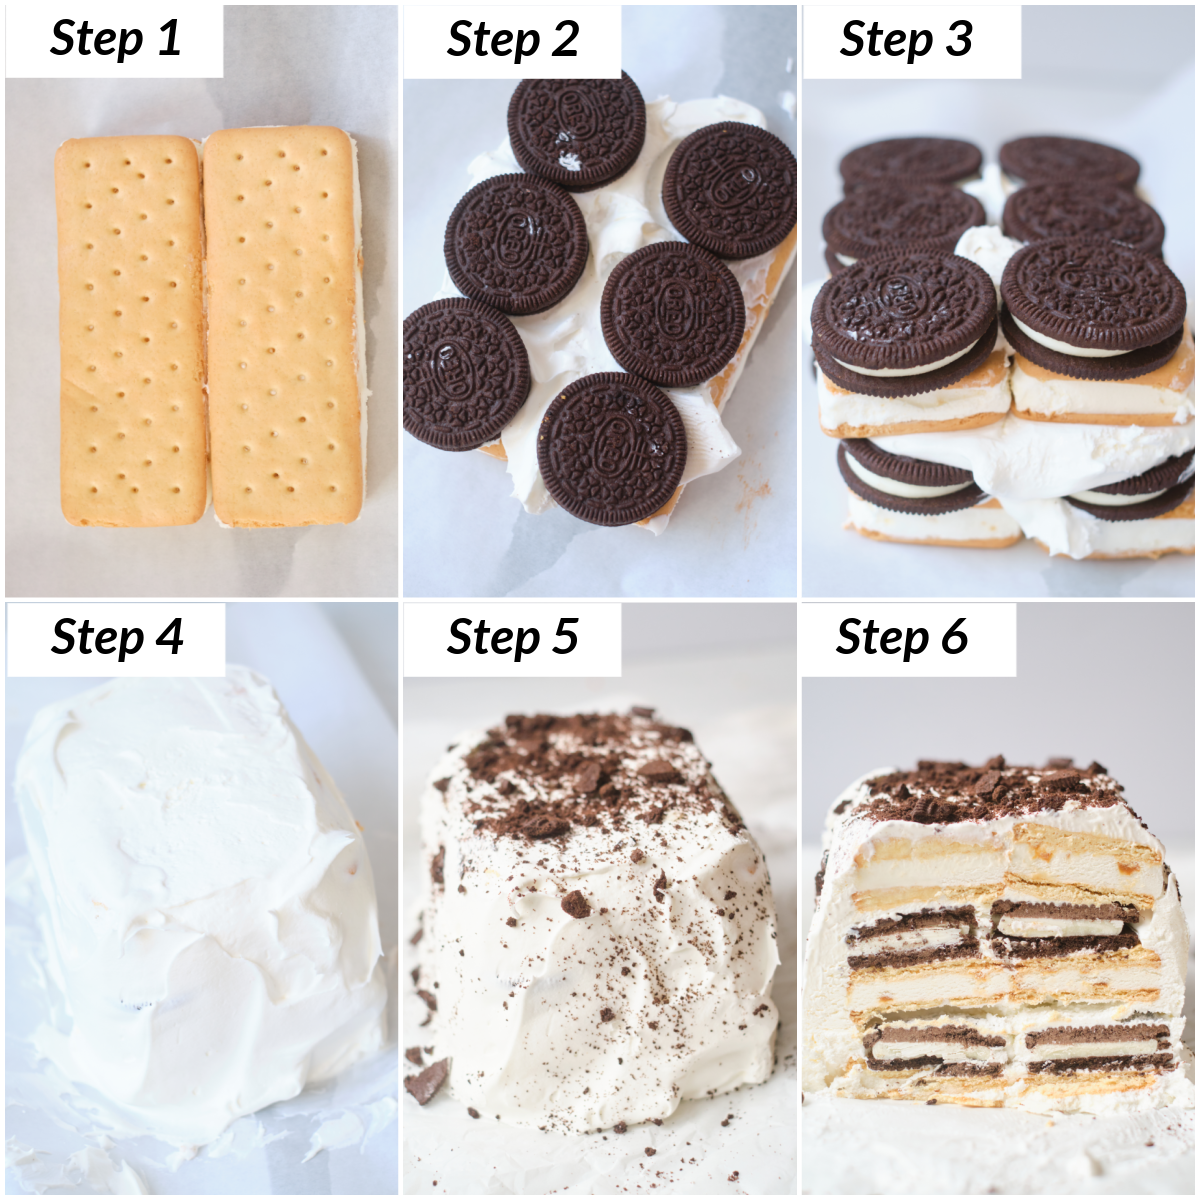 image collage showing the steps for making ice cream sandwich cake